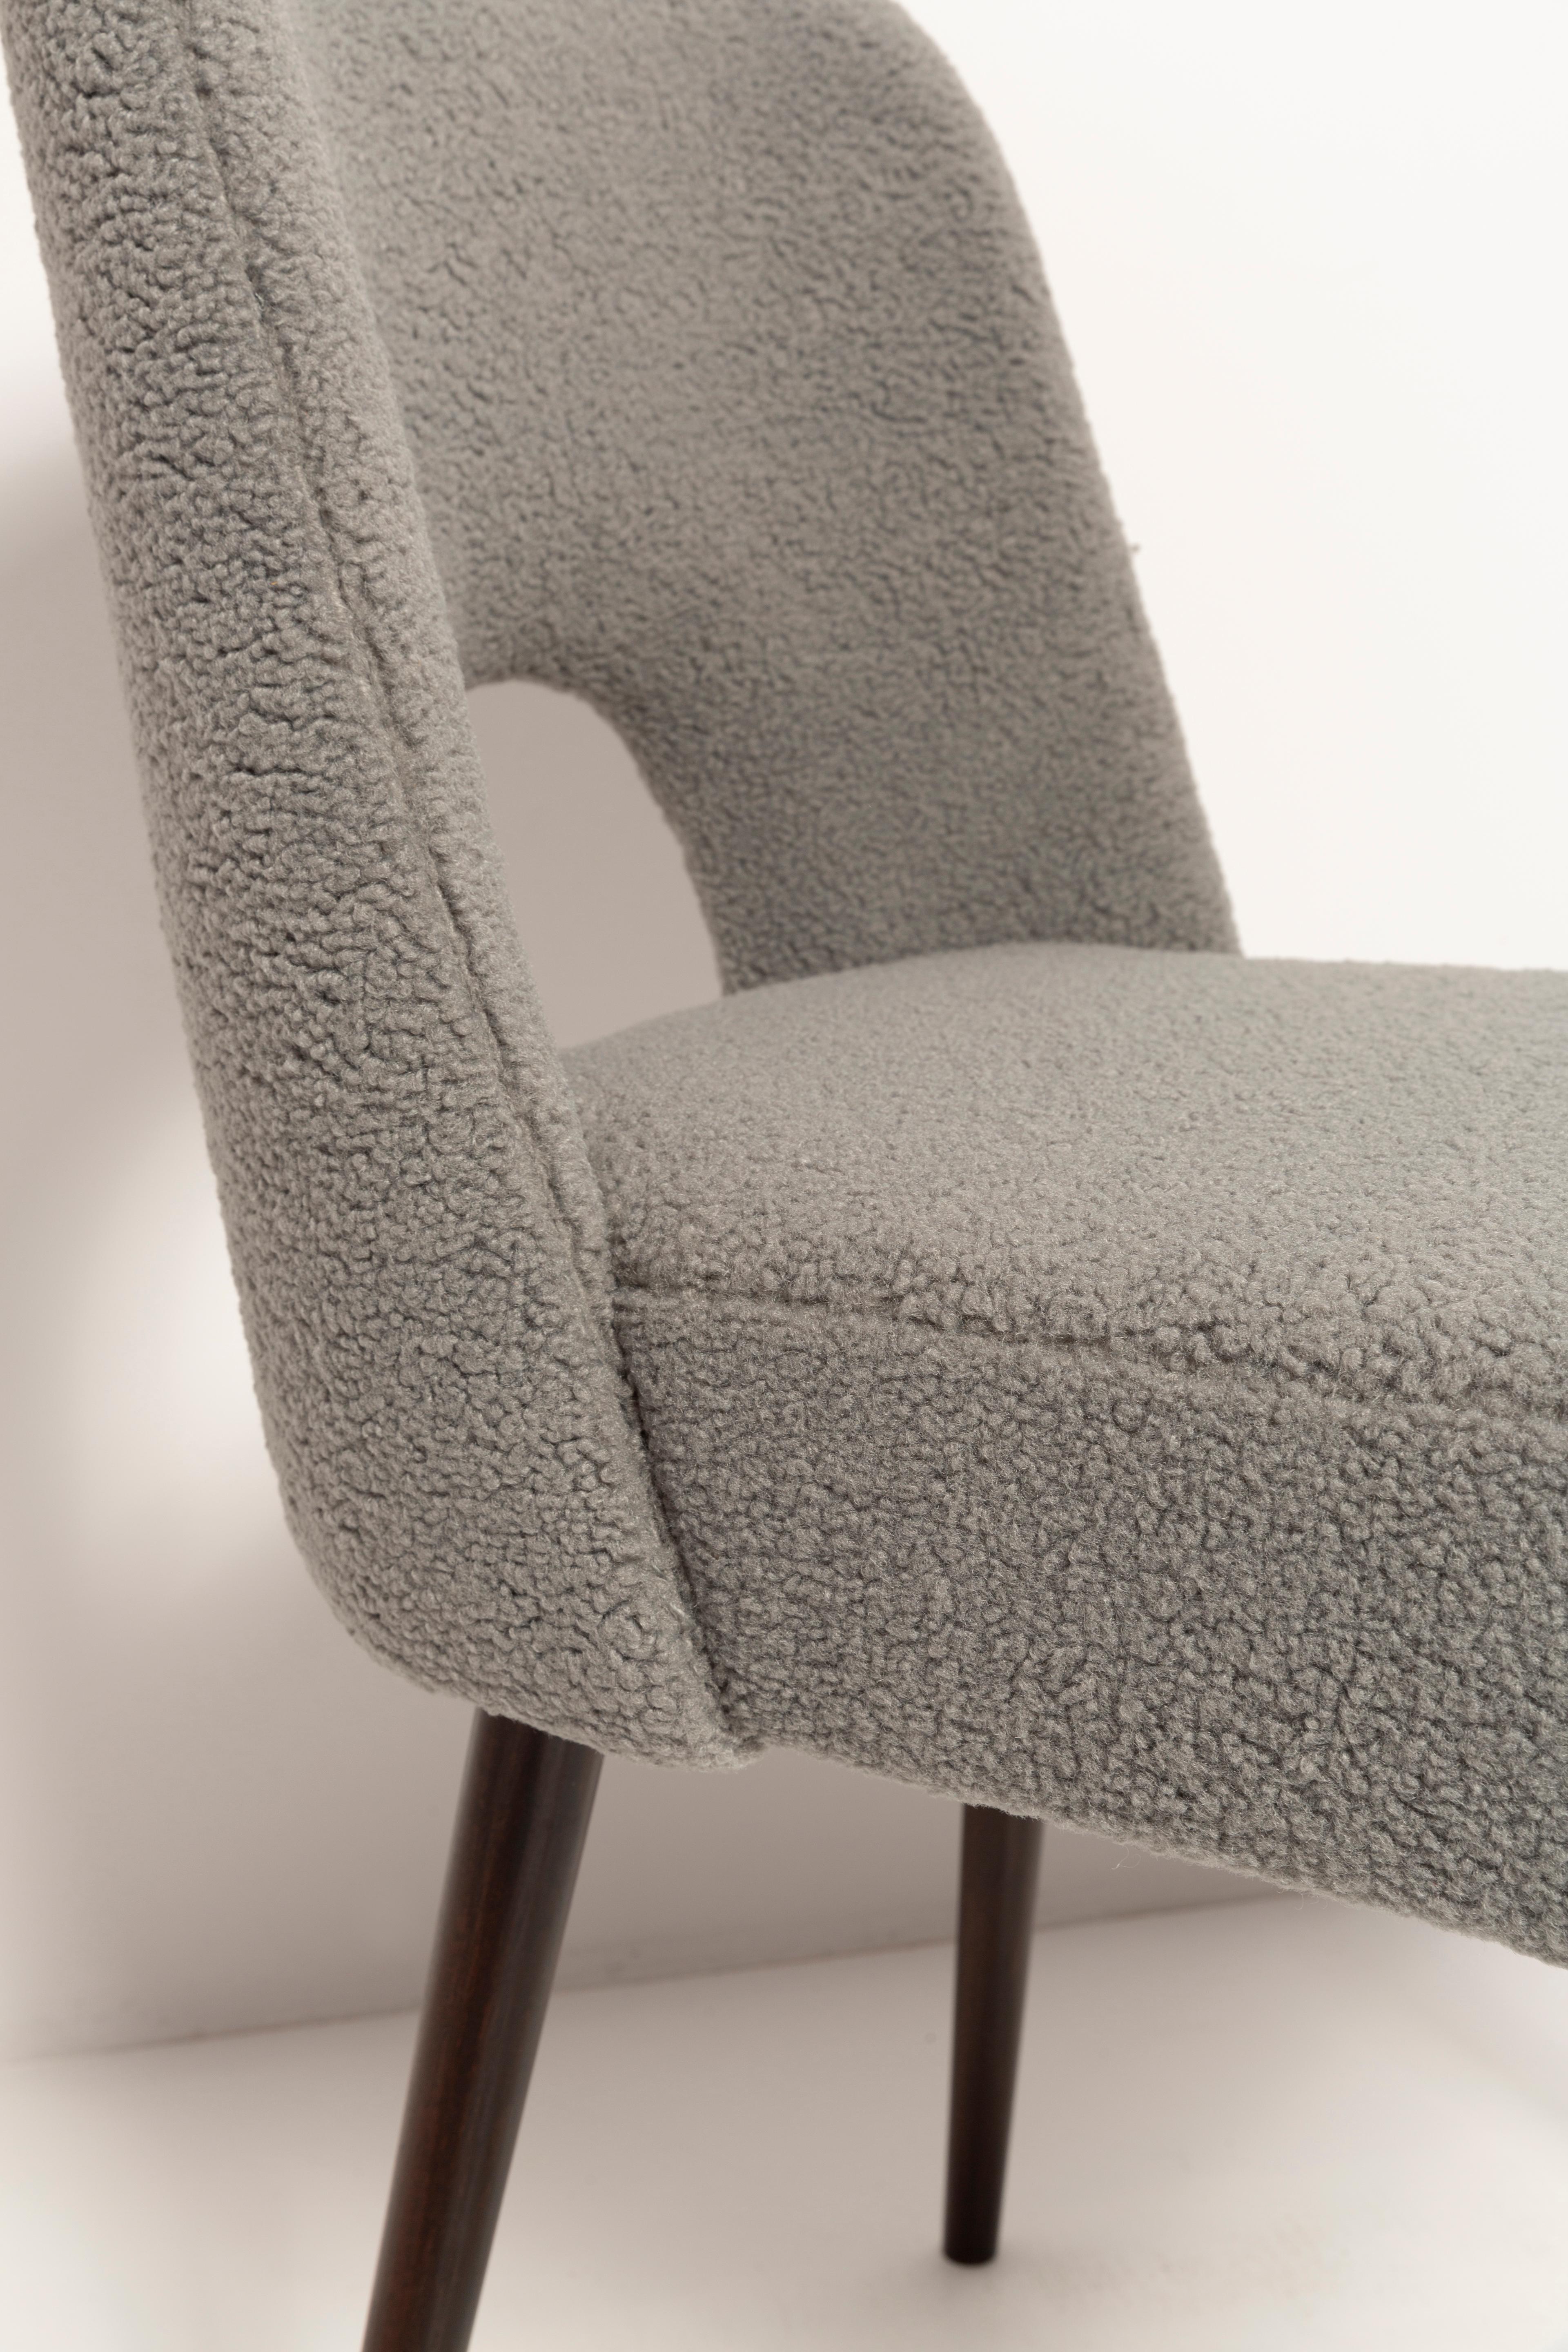 Polish Gray Boucle 'Shell' Chair, Europe, 1960s For Sale